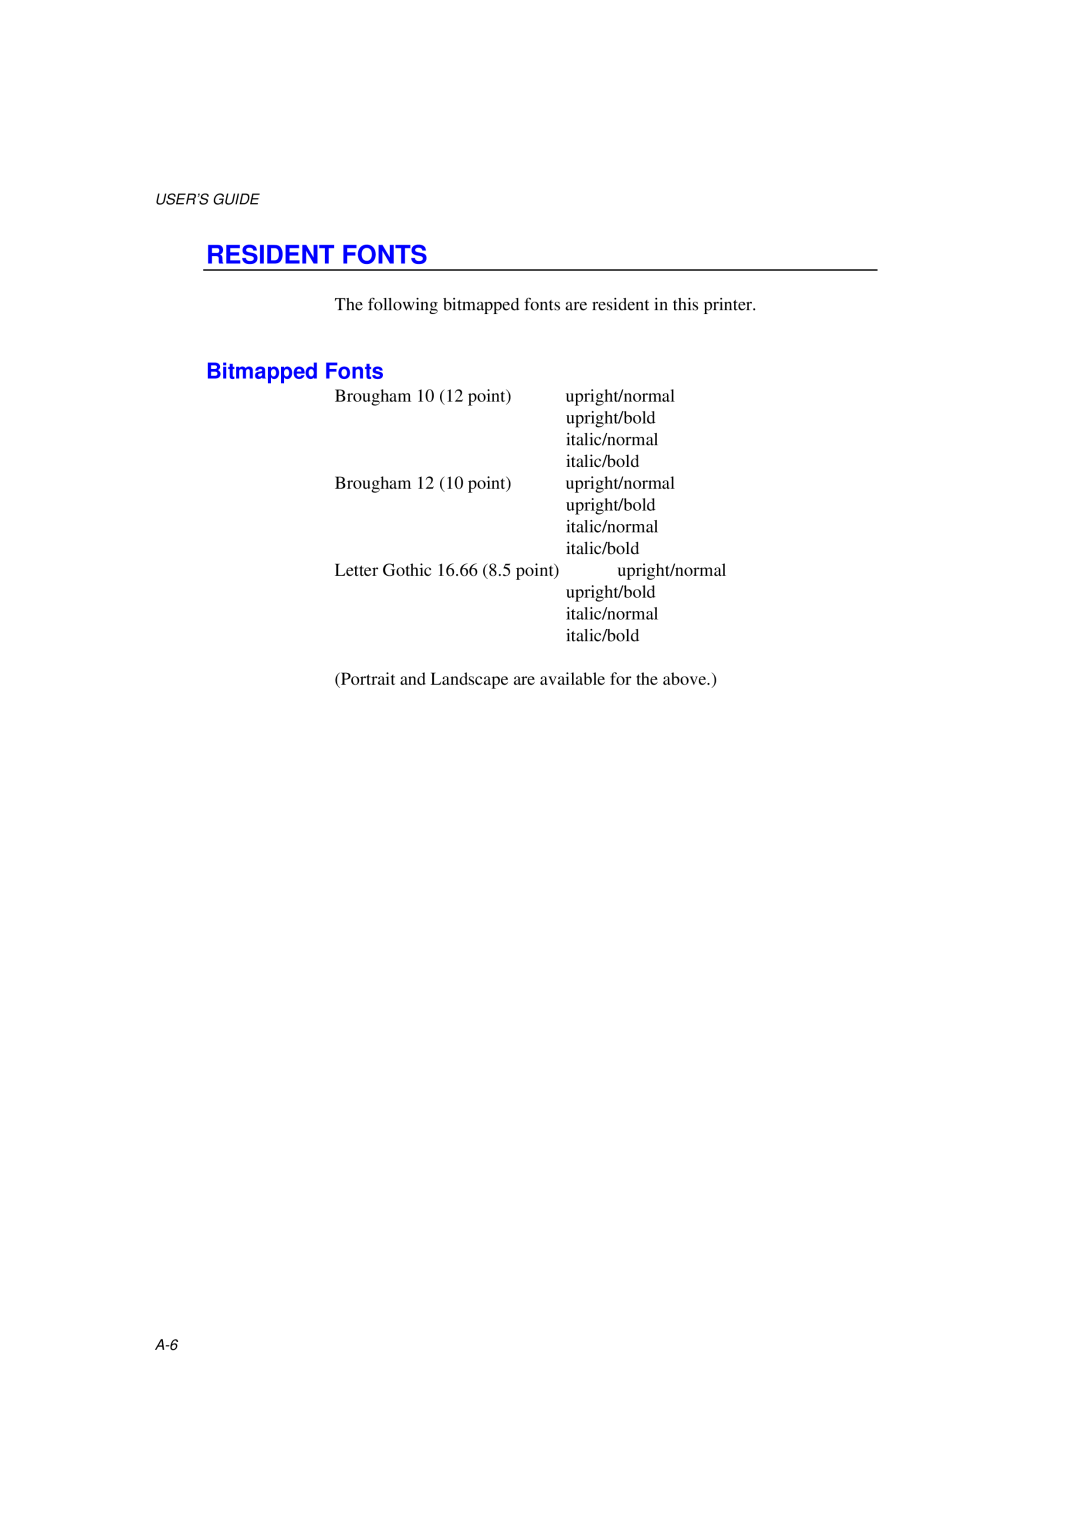 Brother MFC/HL-P2000 manual Resident Fonts, Bitmapped Fonts 